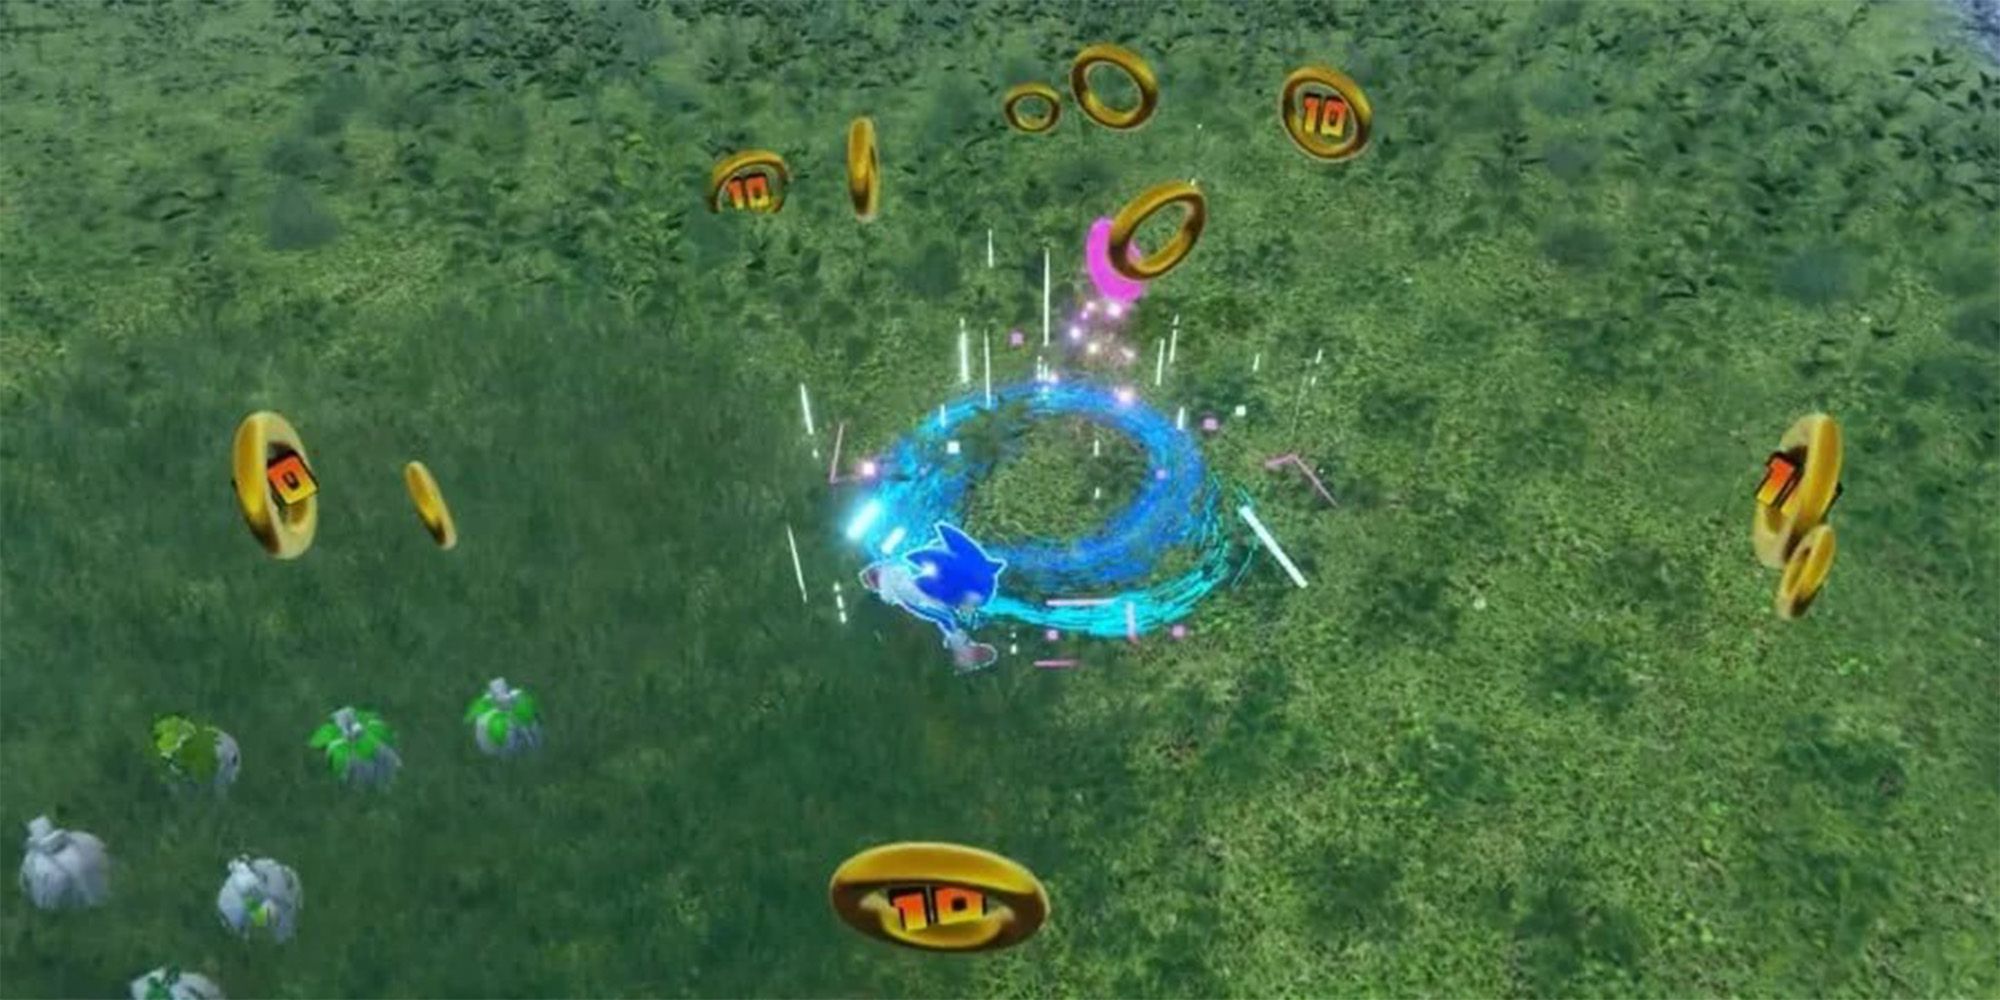 Sonic spins for rings in Frontiers